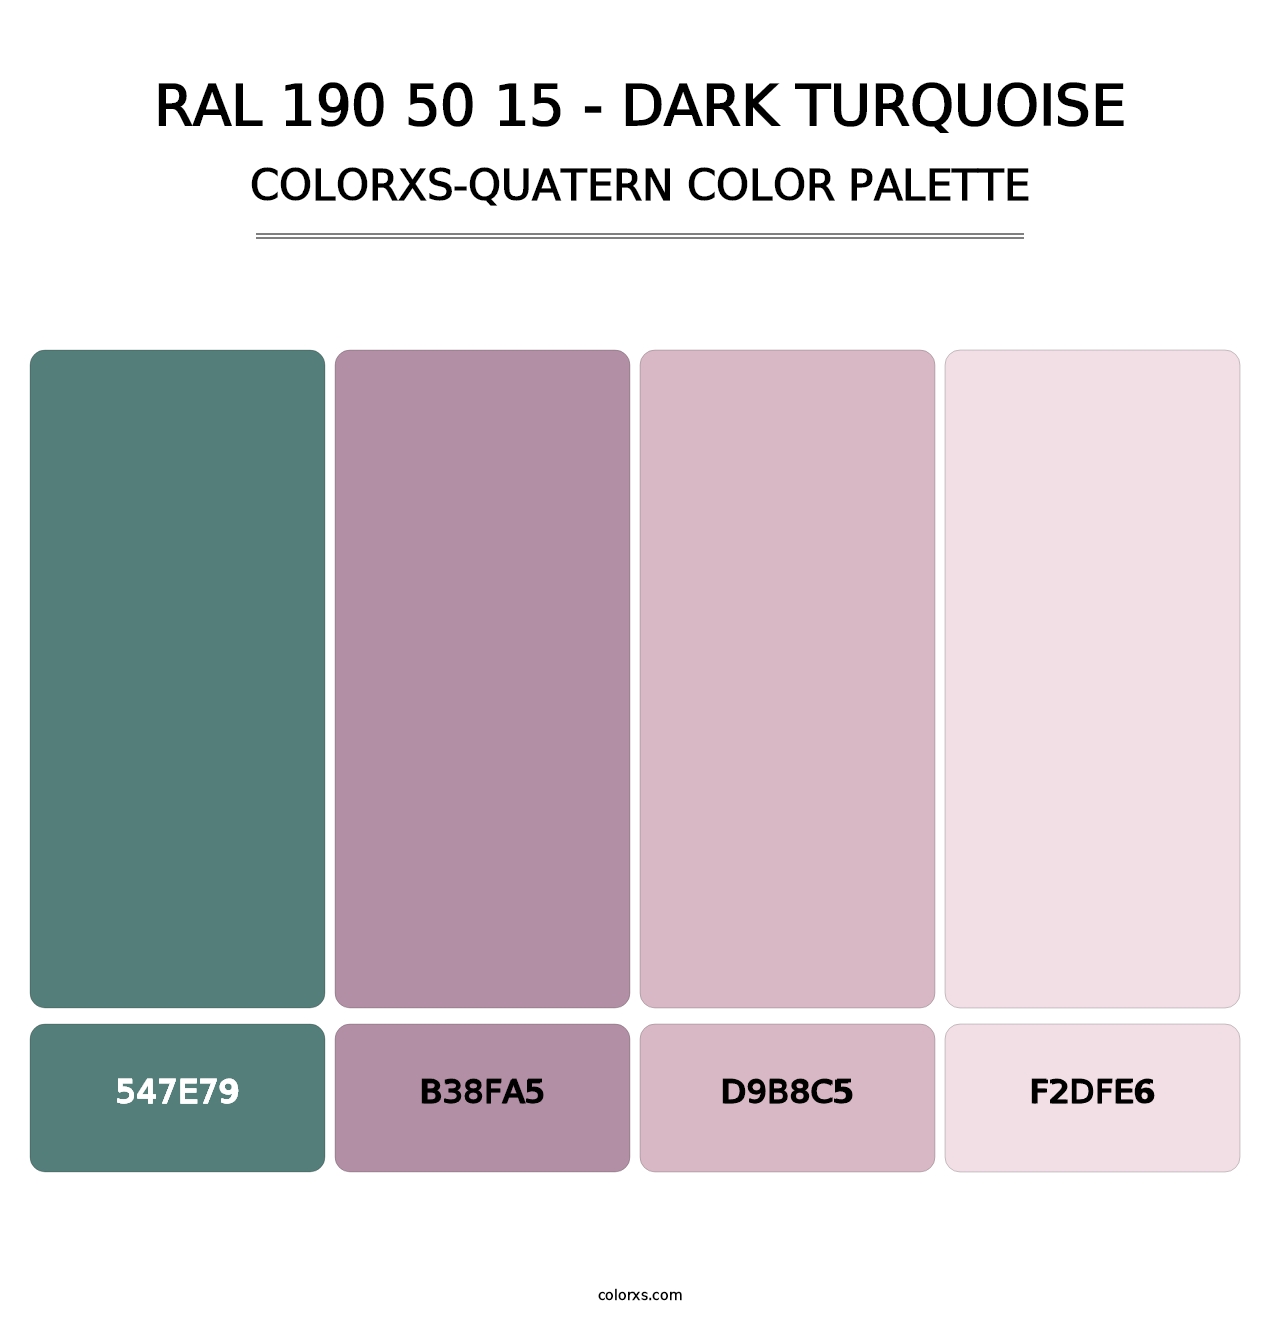 RAL 190 50 15 - Dark Turquoise - Colorxs Quatern Palette